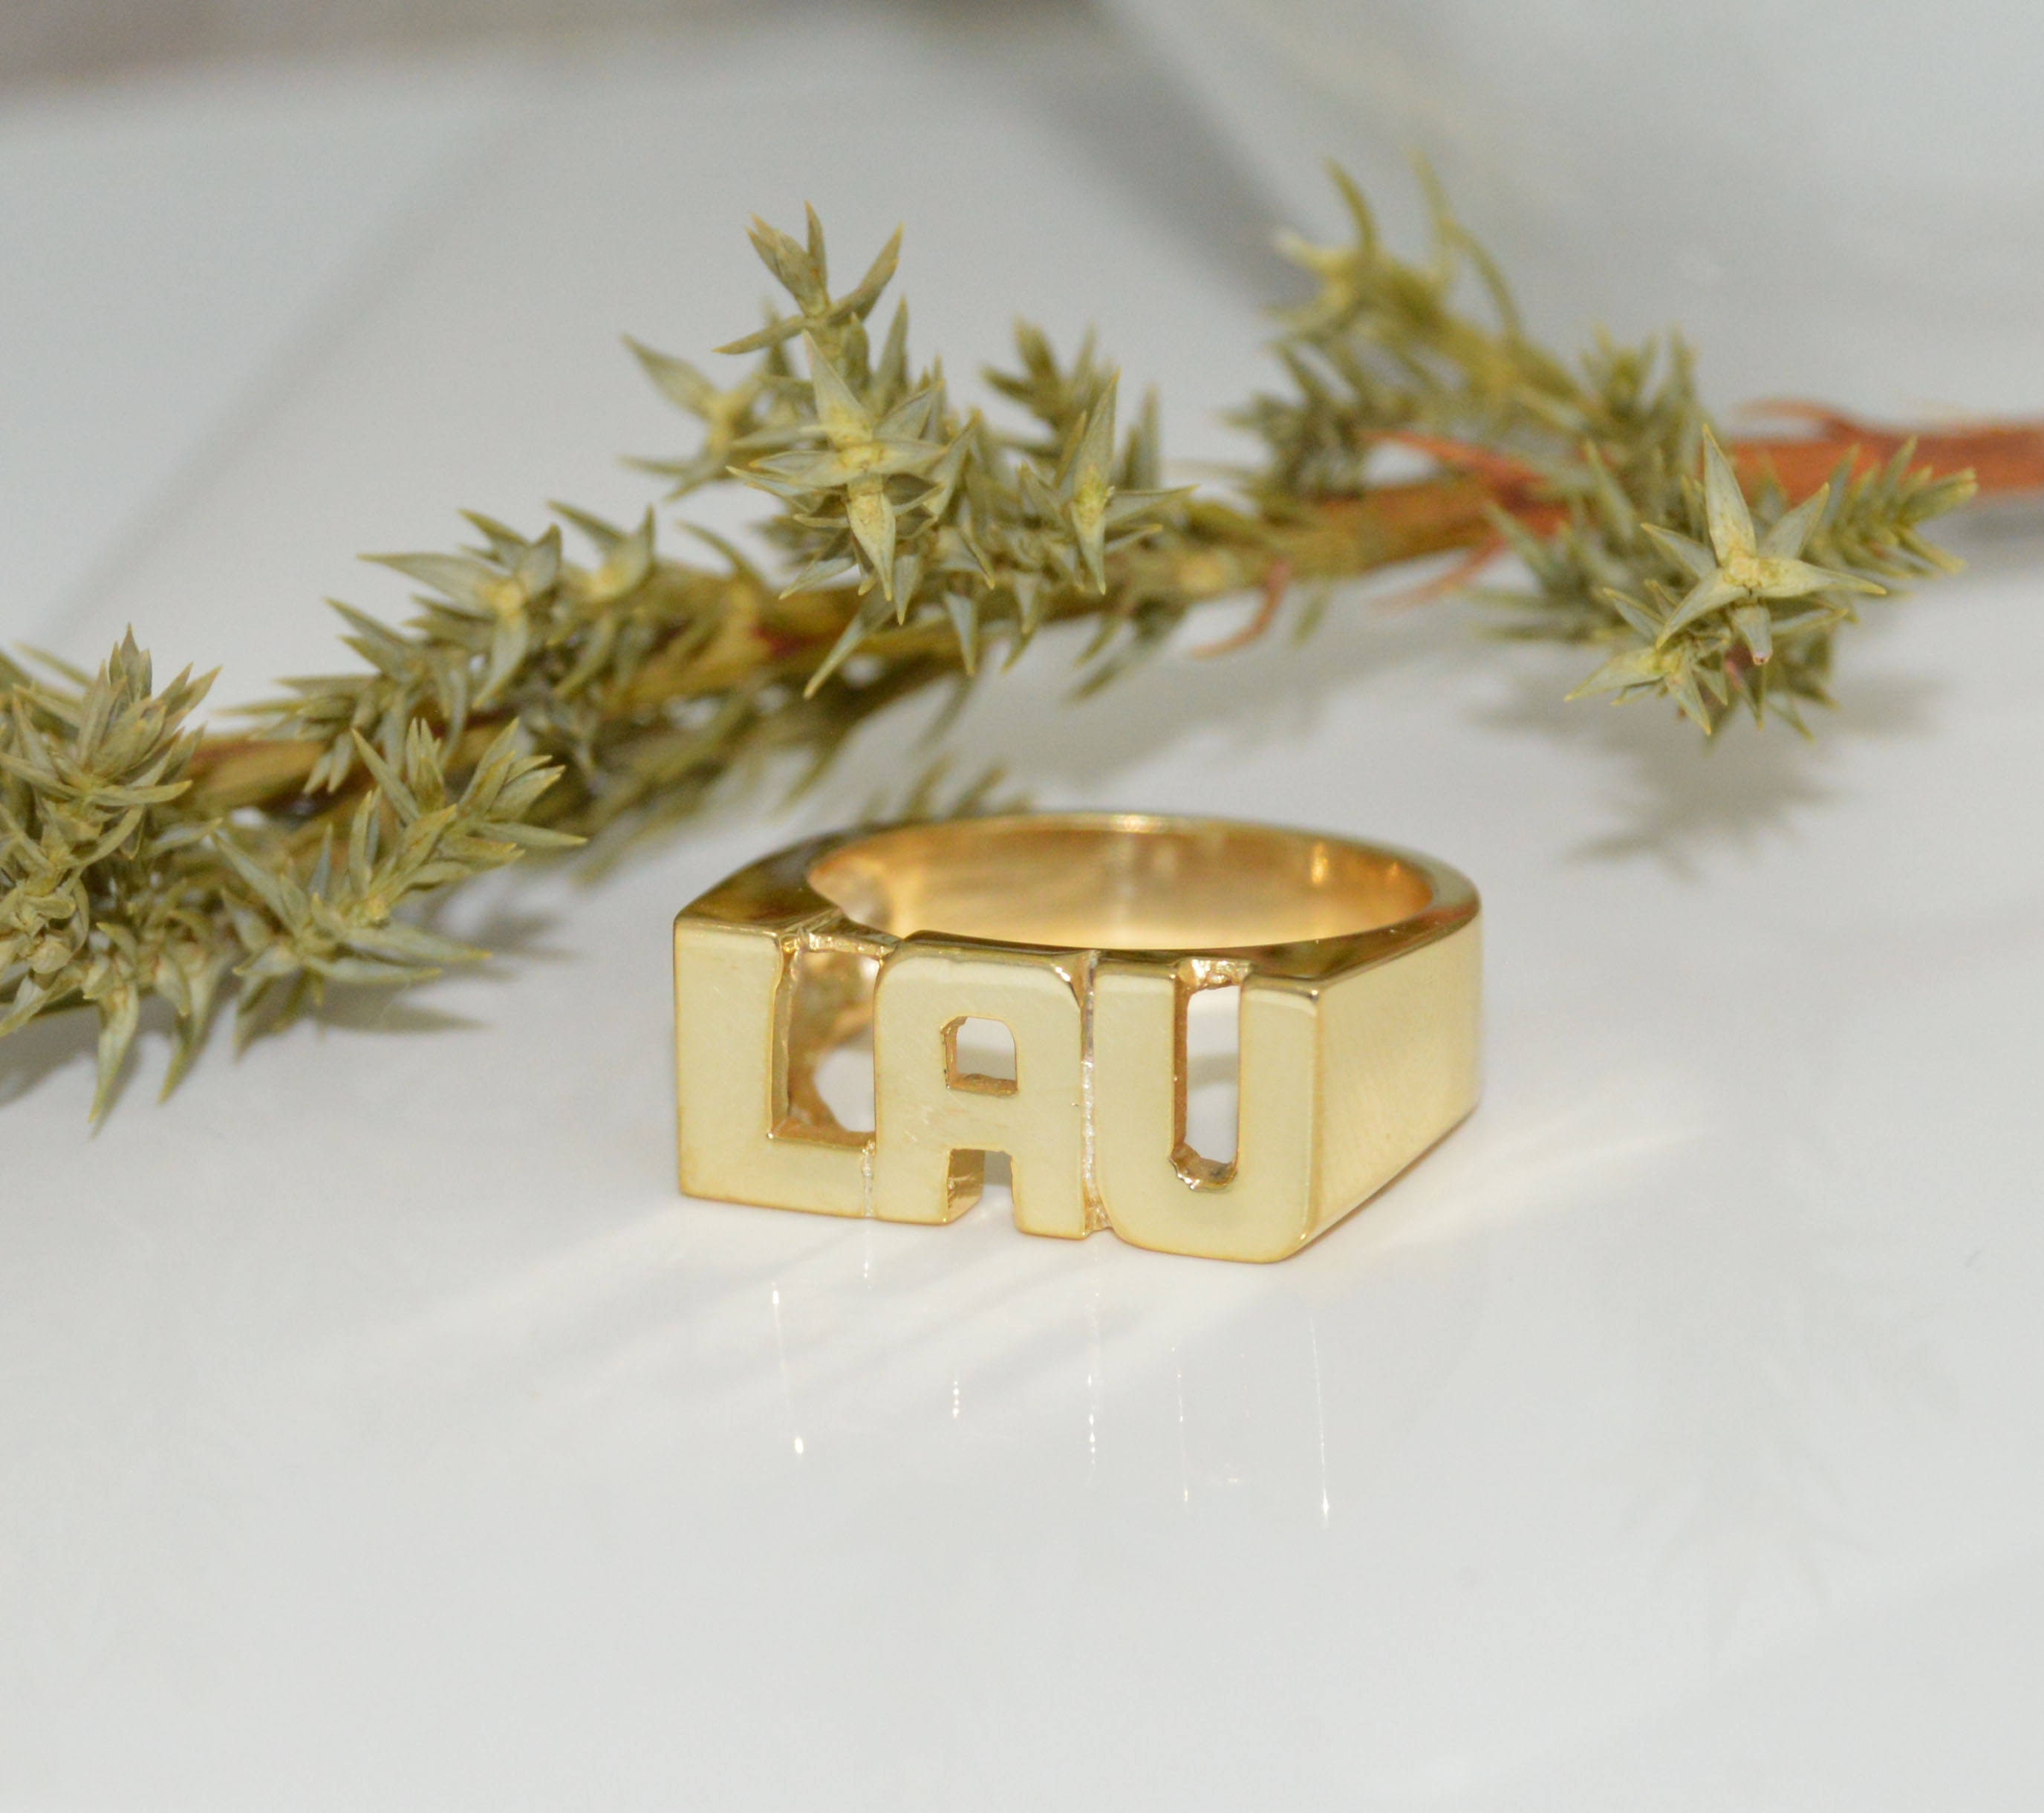 Custom Name Ring Handcrafted Personalized Jewelry Stainless Steel For Men  Women | eBay